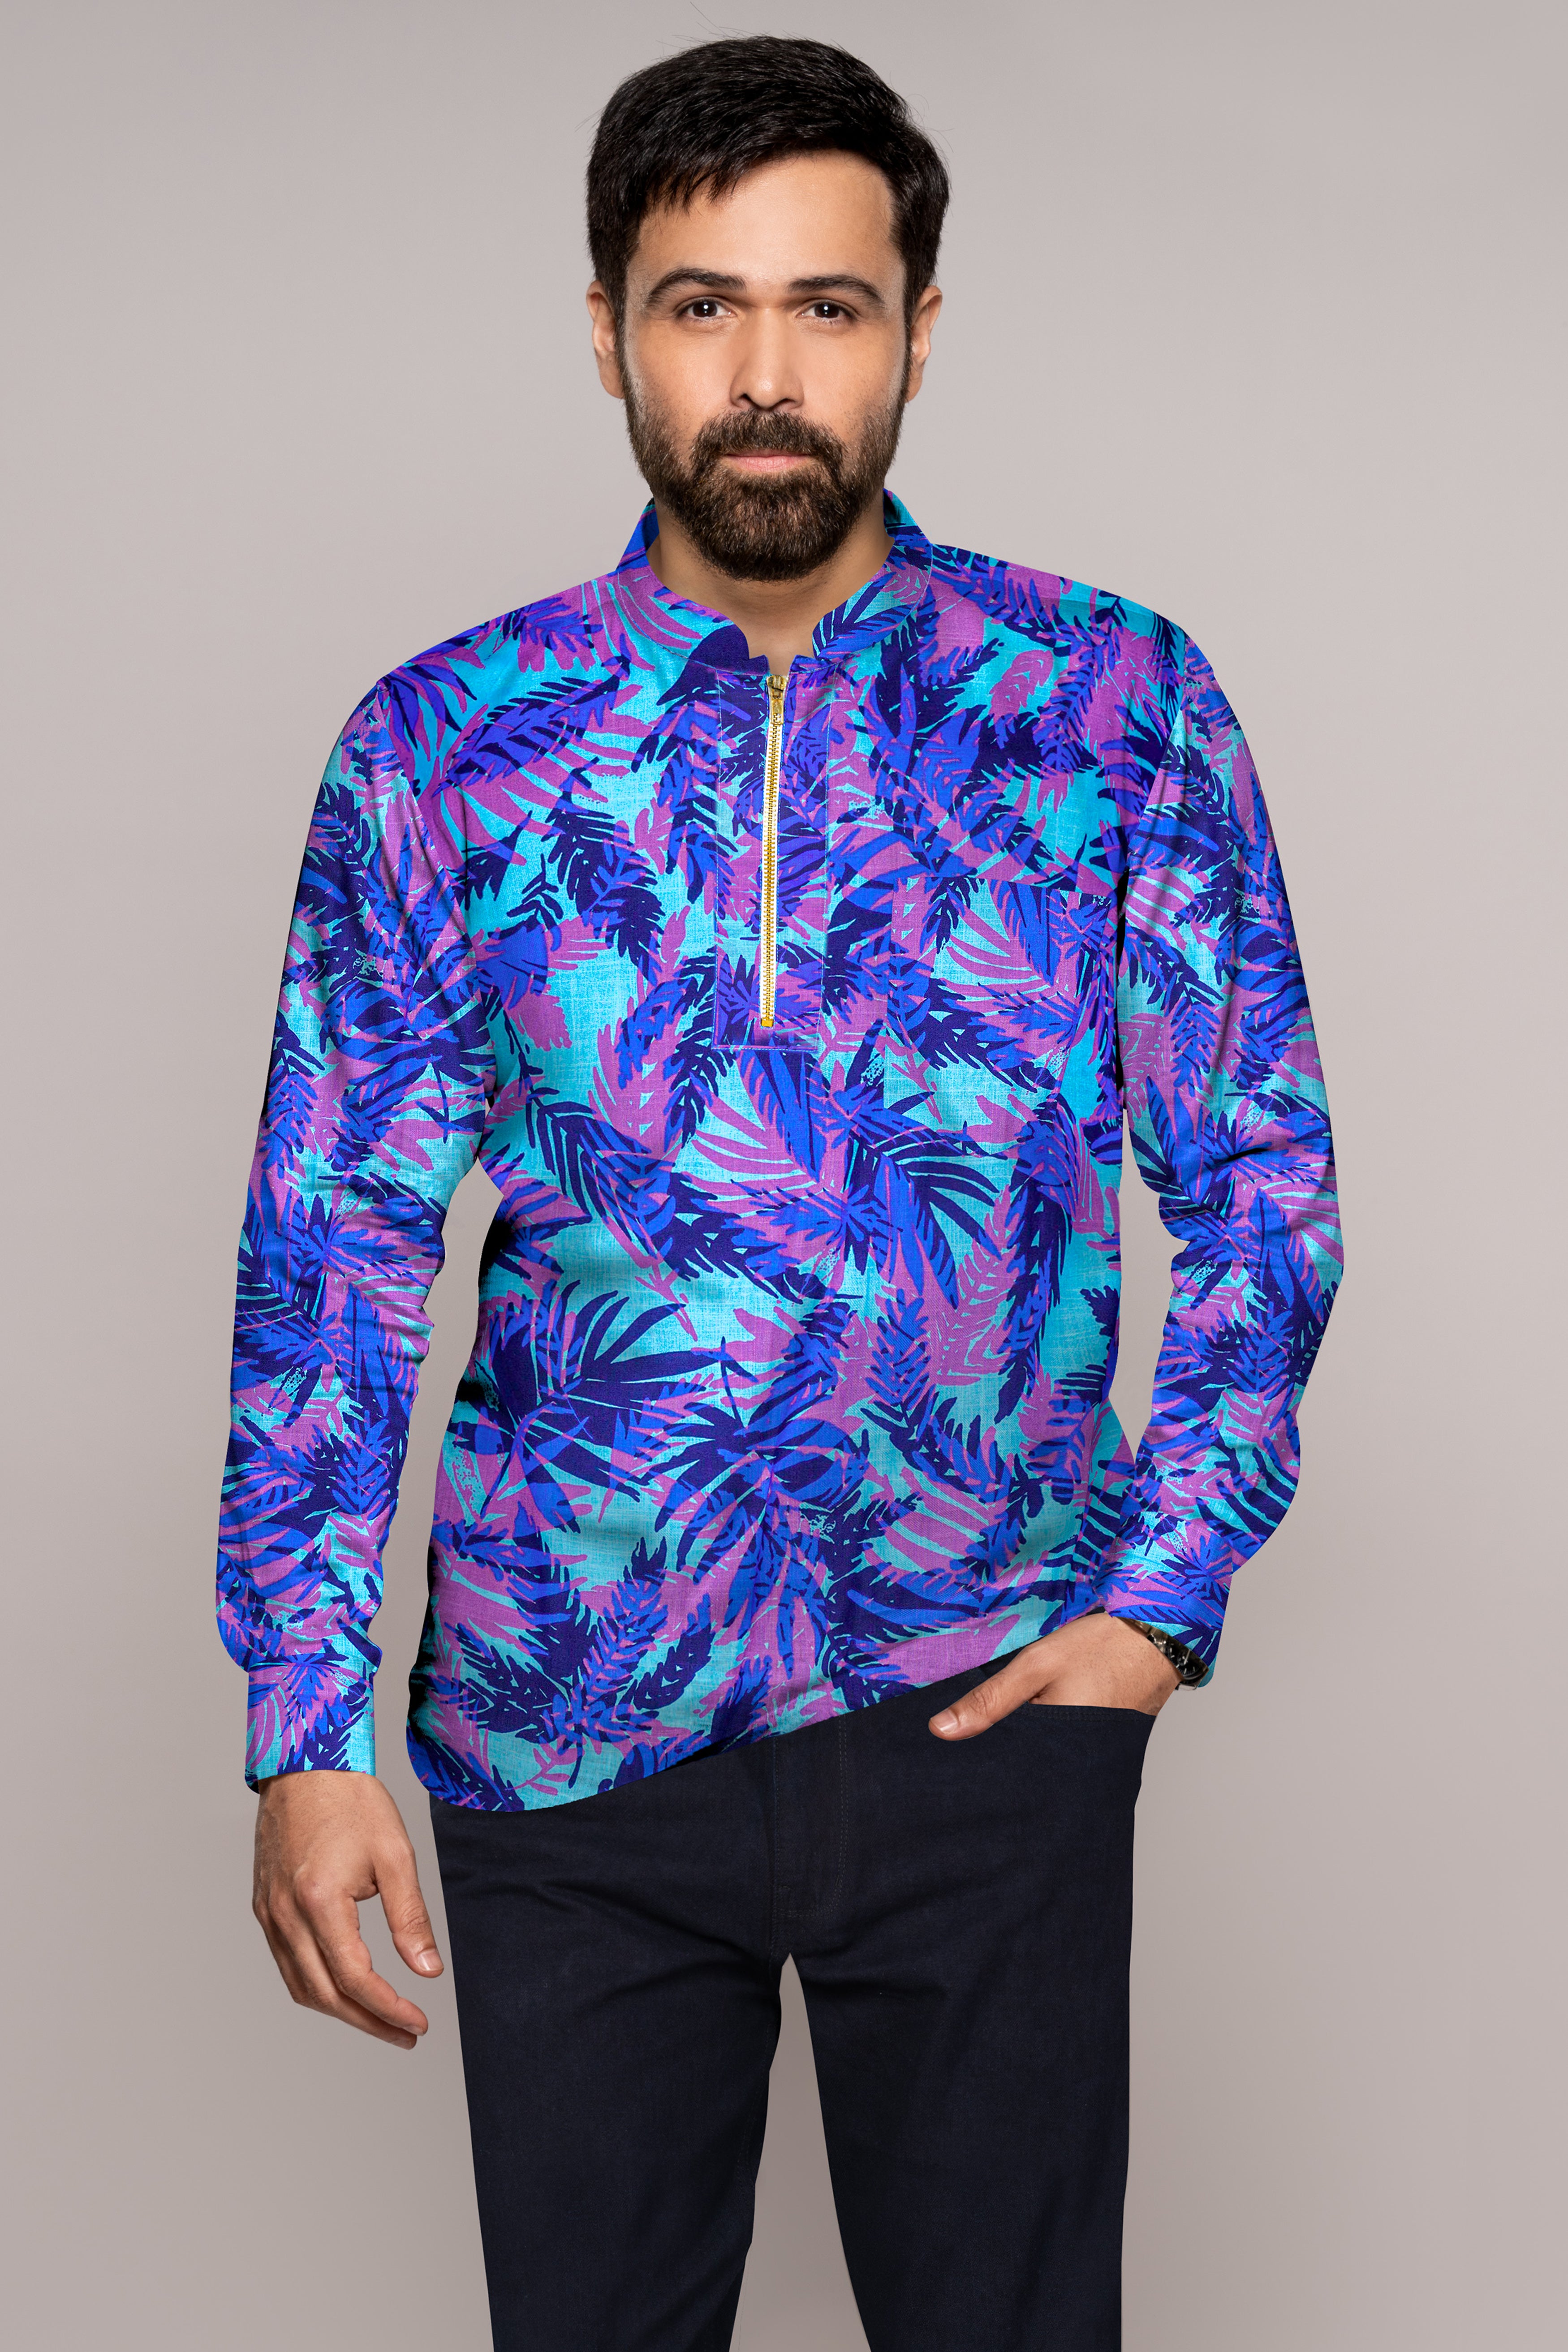 Mariner Blue with Malbu Sky Blue Leaves Printed Chambray Shirt with Zipper Closure